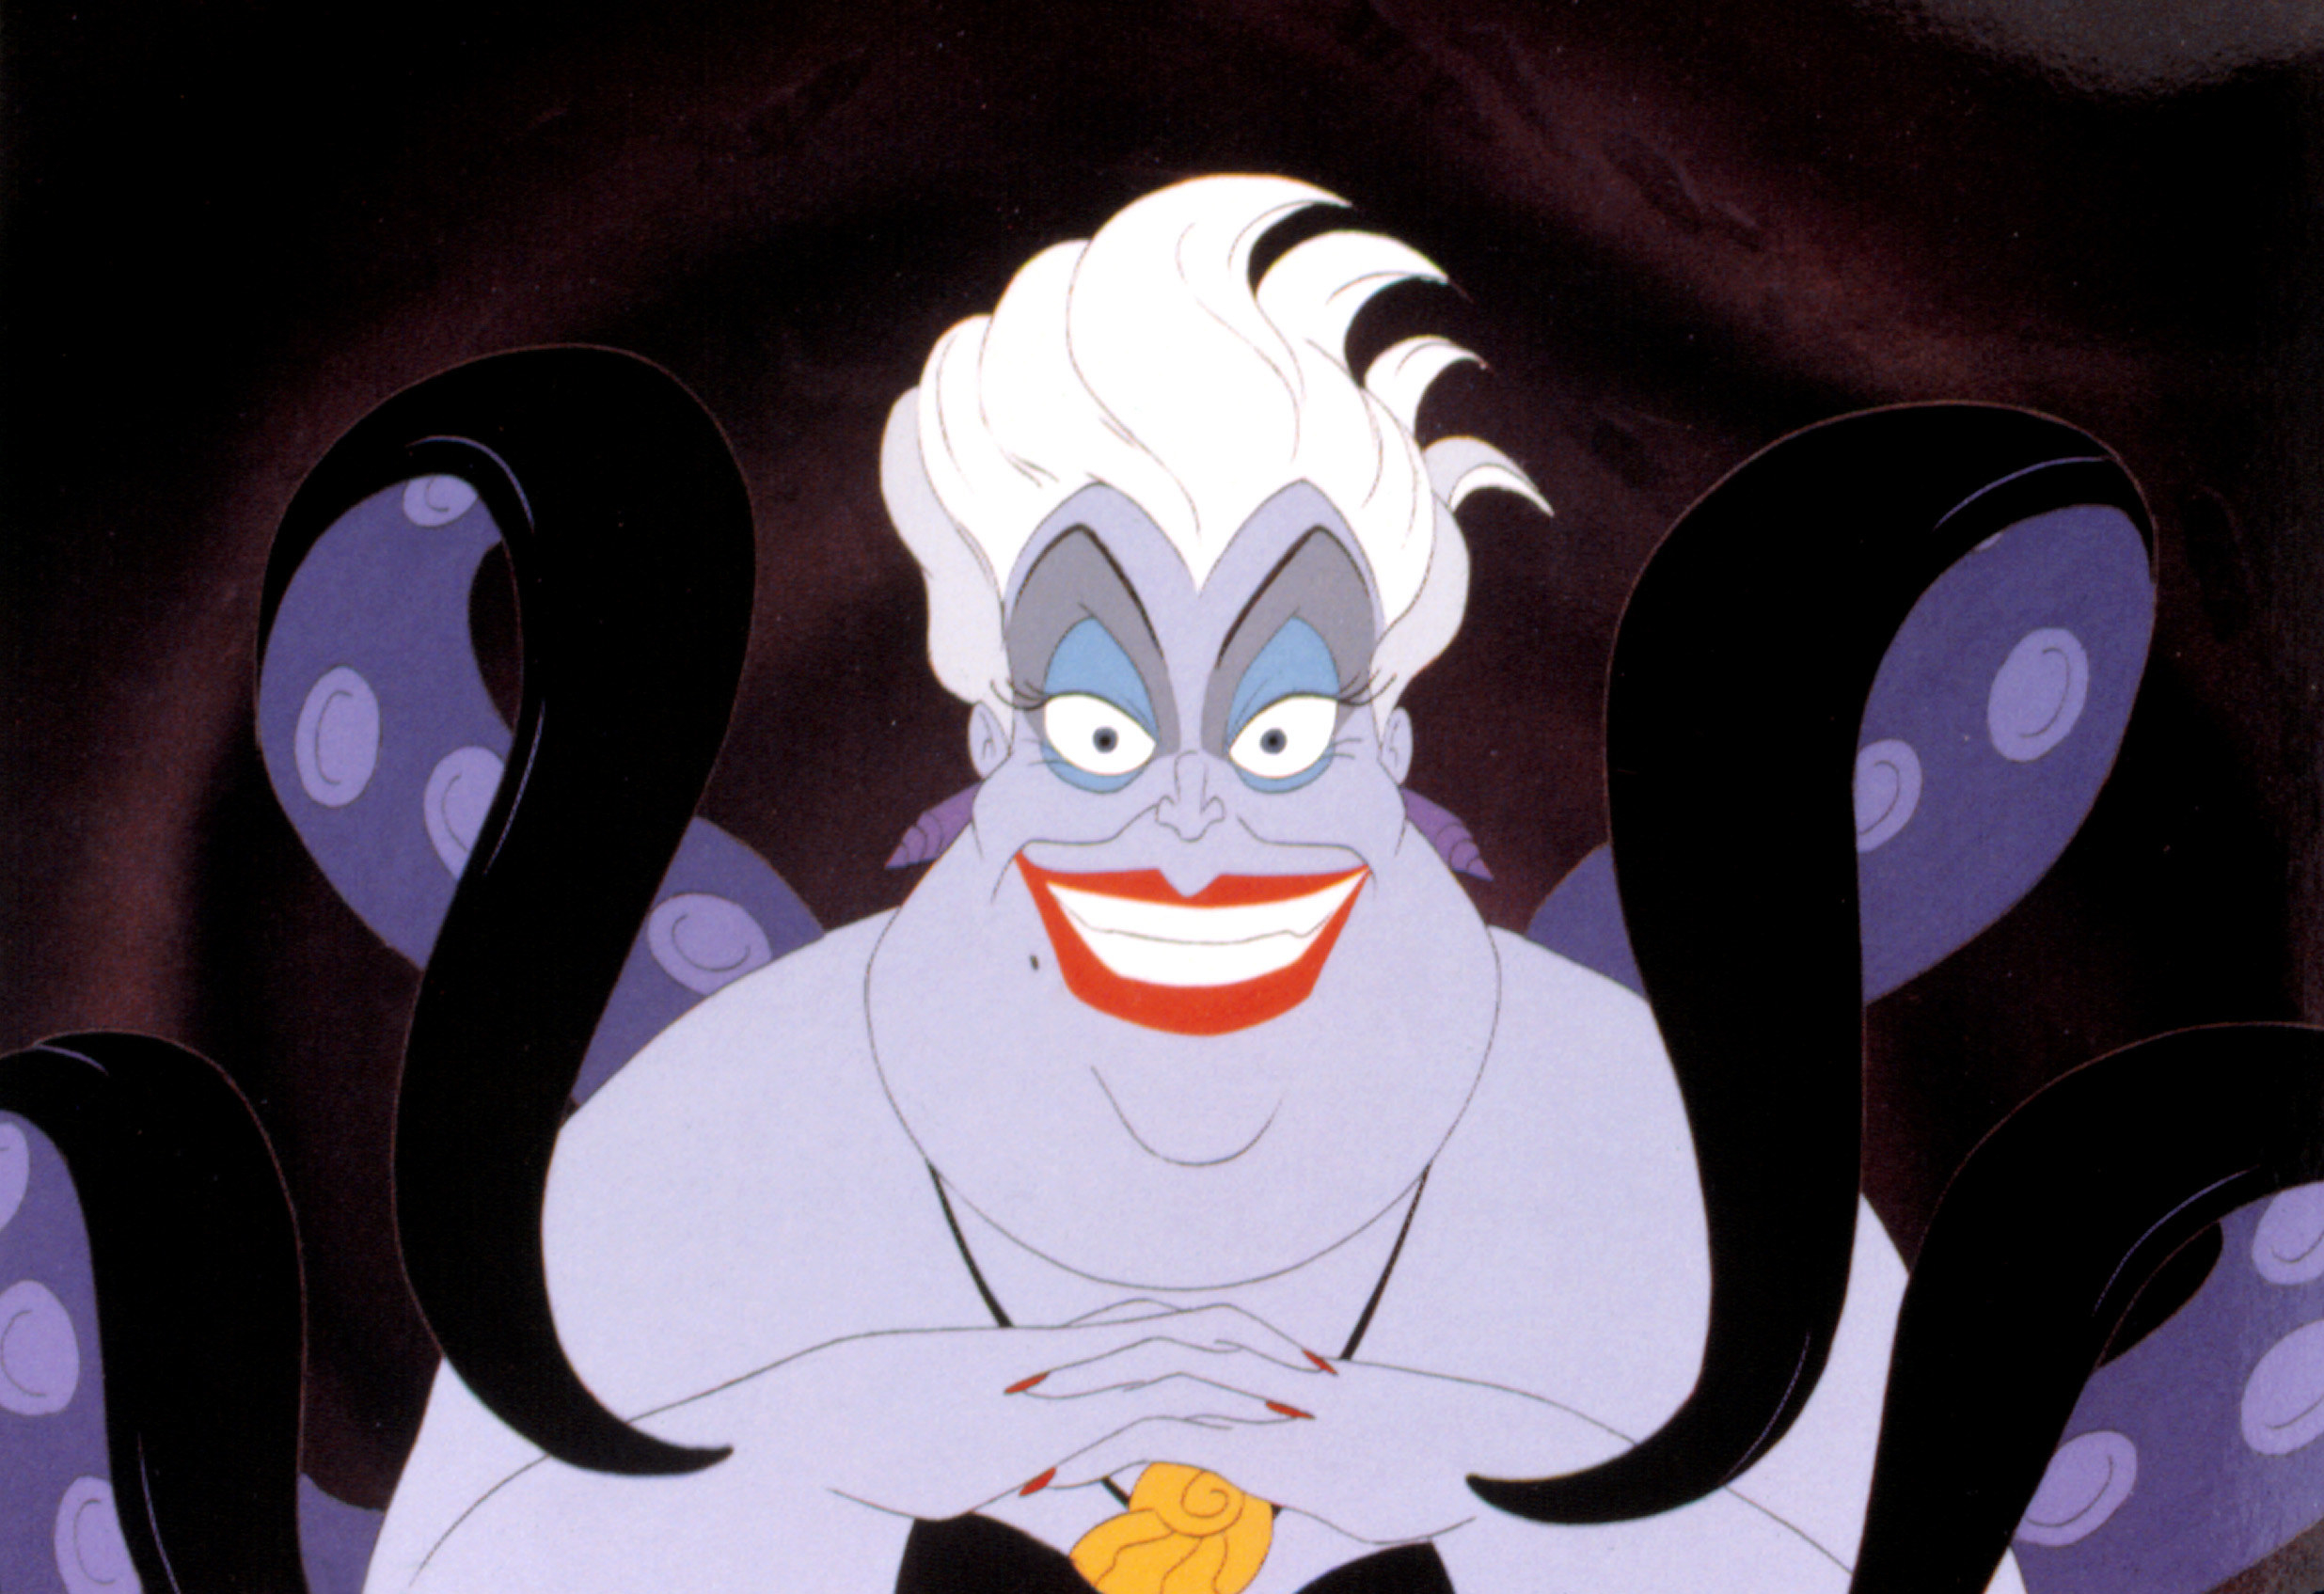 The iconic Ursula gives an evil smile in &quot;The Little Mermaid&quot;